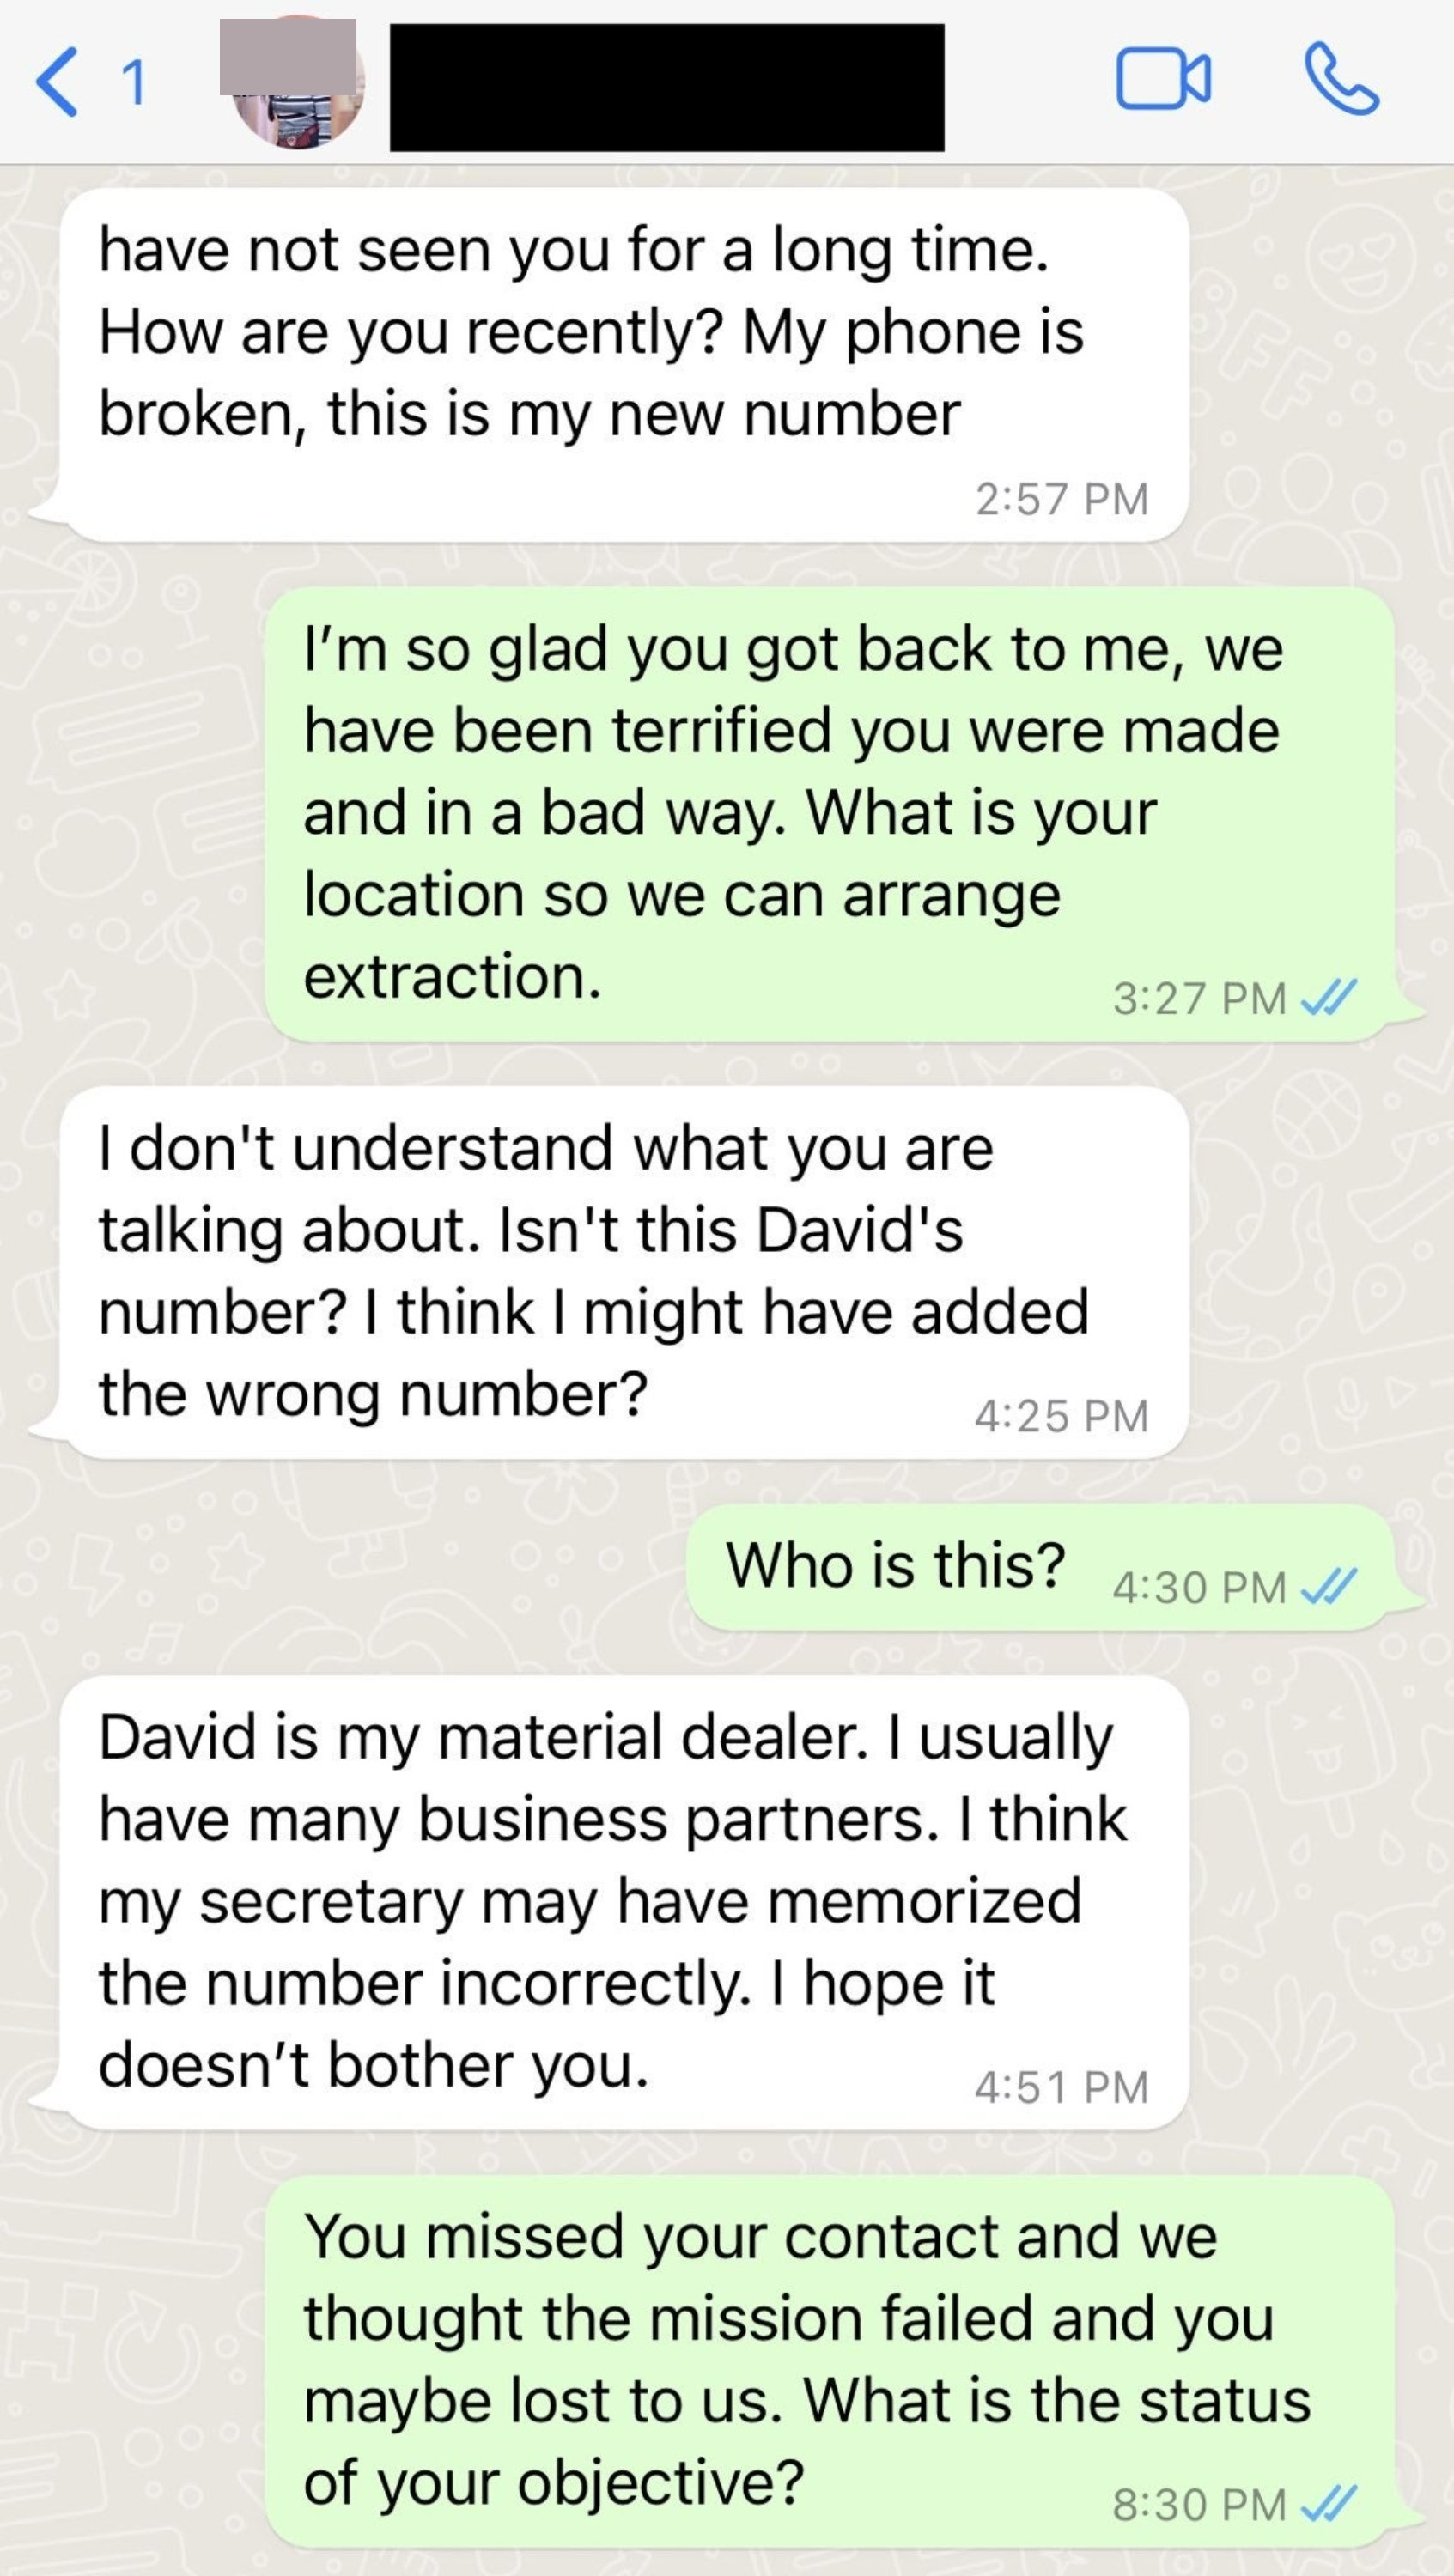 Person who is texted by a scammer and pretends that the scammer is a secret agent who is compromised